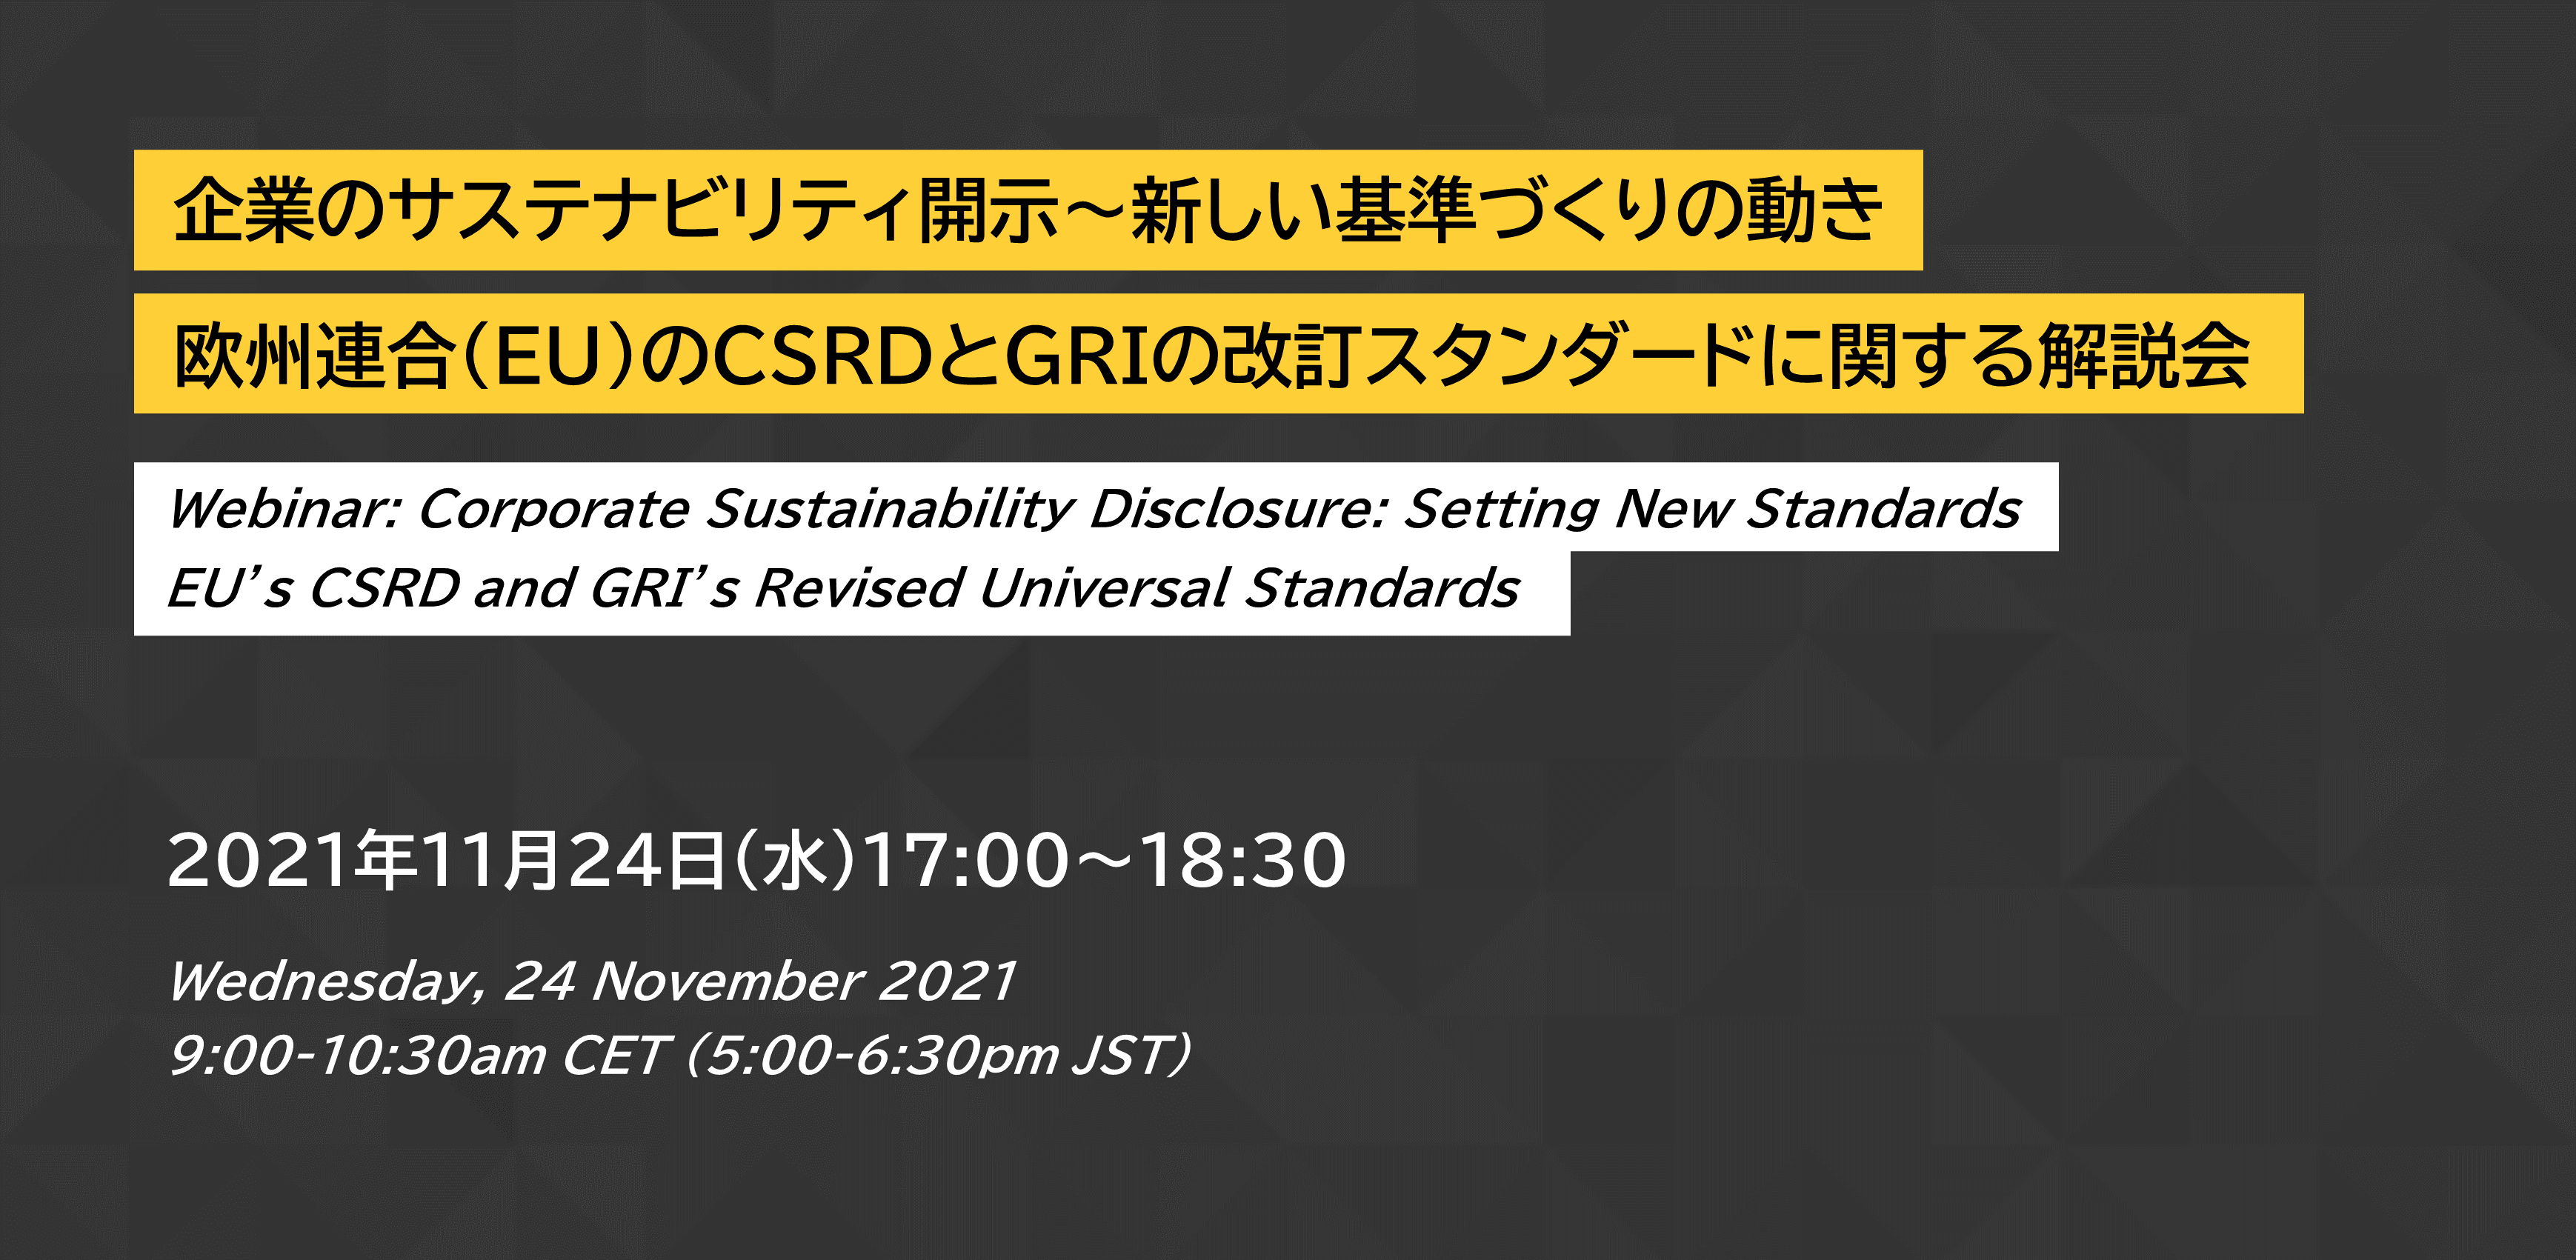 Webinar: Corporate Sustainability Disclosure: Setting New Standards – EU’s CSRD and GRI’s Revised Universal Standards